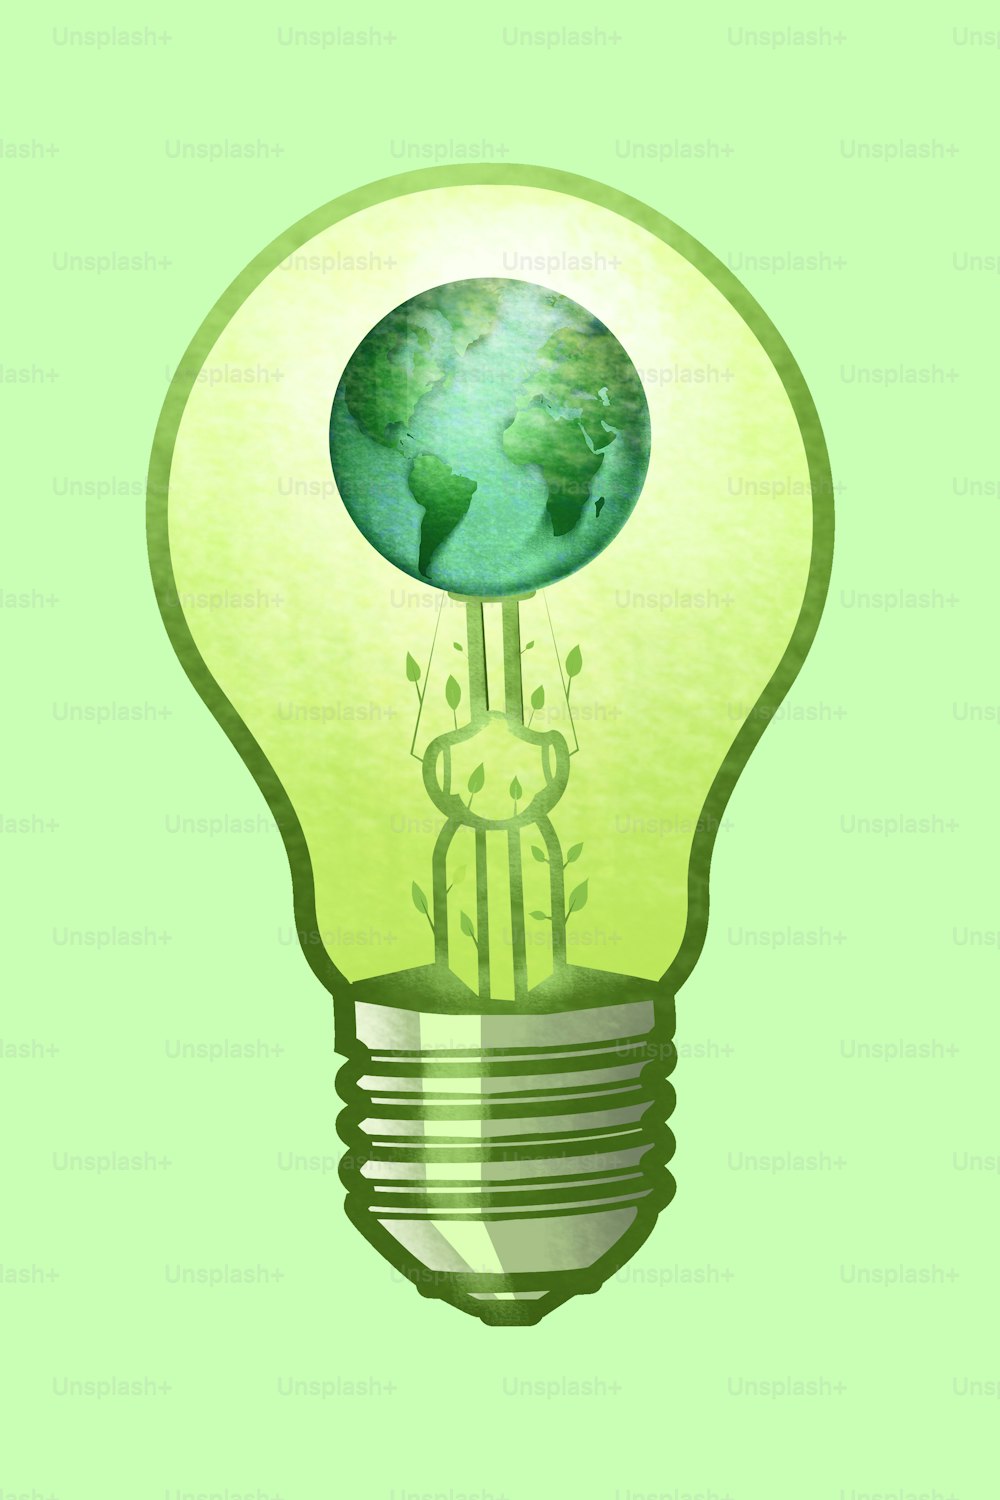 Renewable energy sources. Green energy concept with a light bulb, planet Earth and leaves